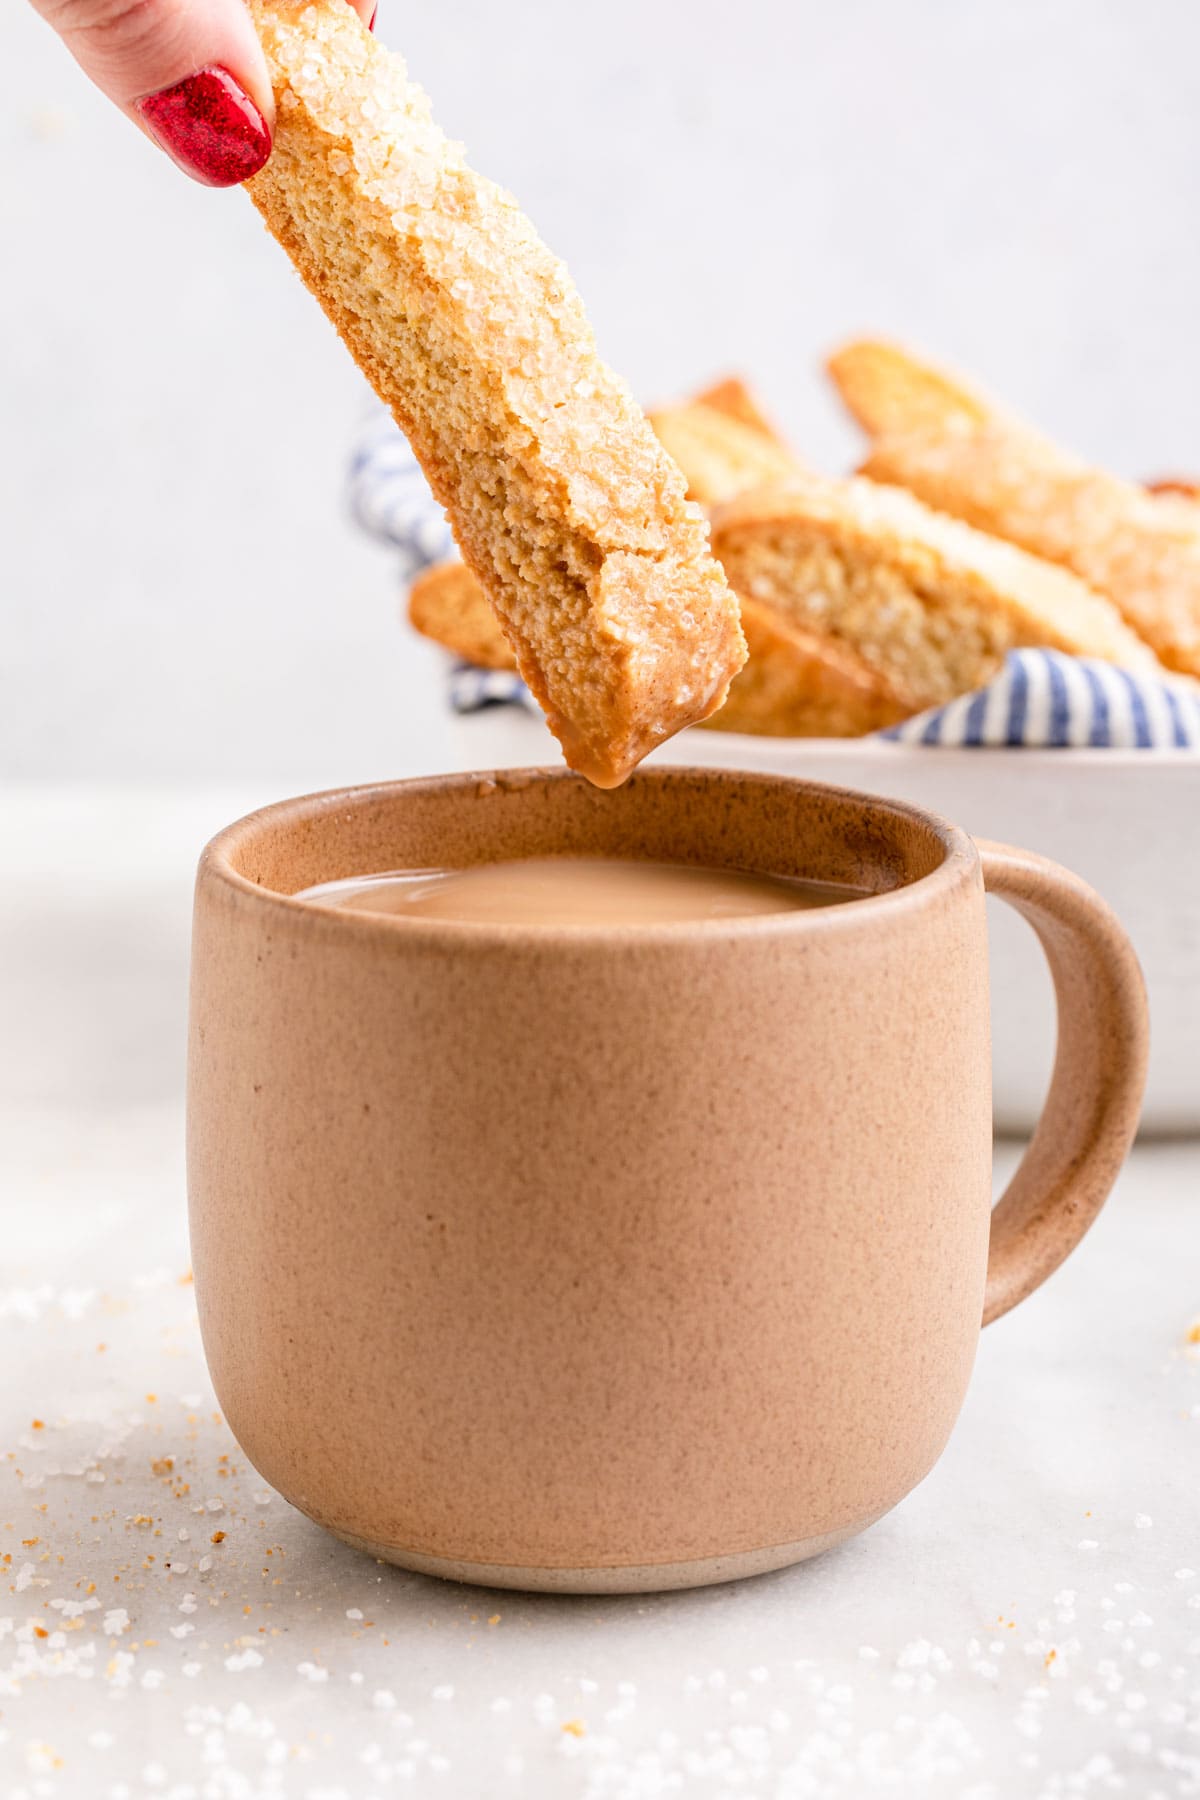 Classic Biscotti Cookies dipping in coffee